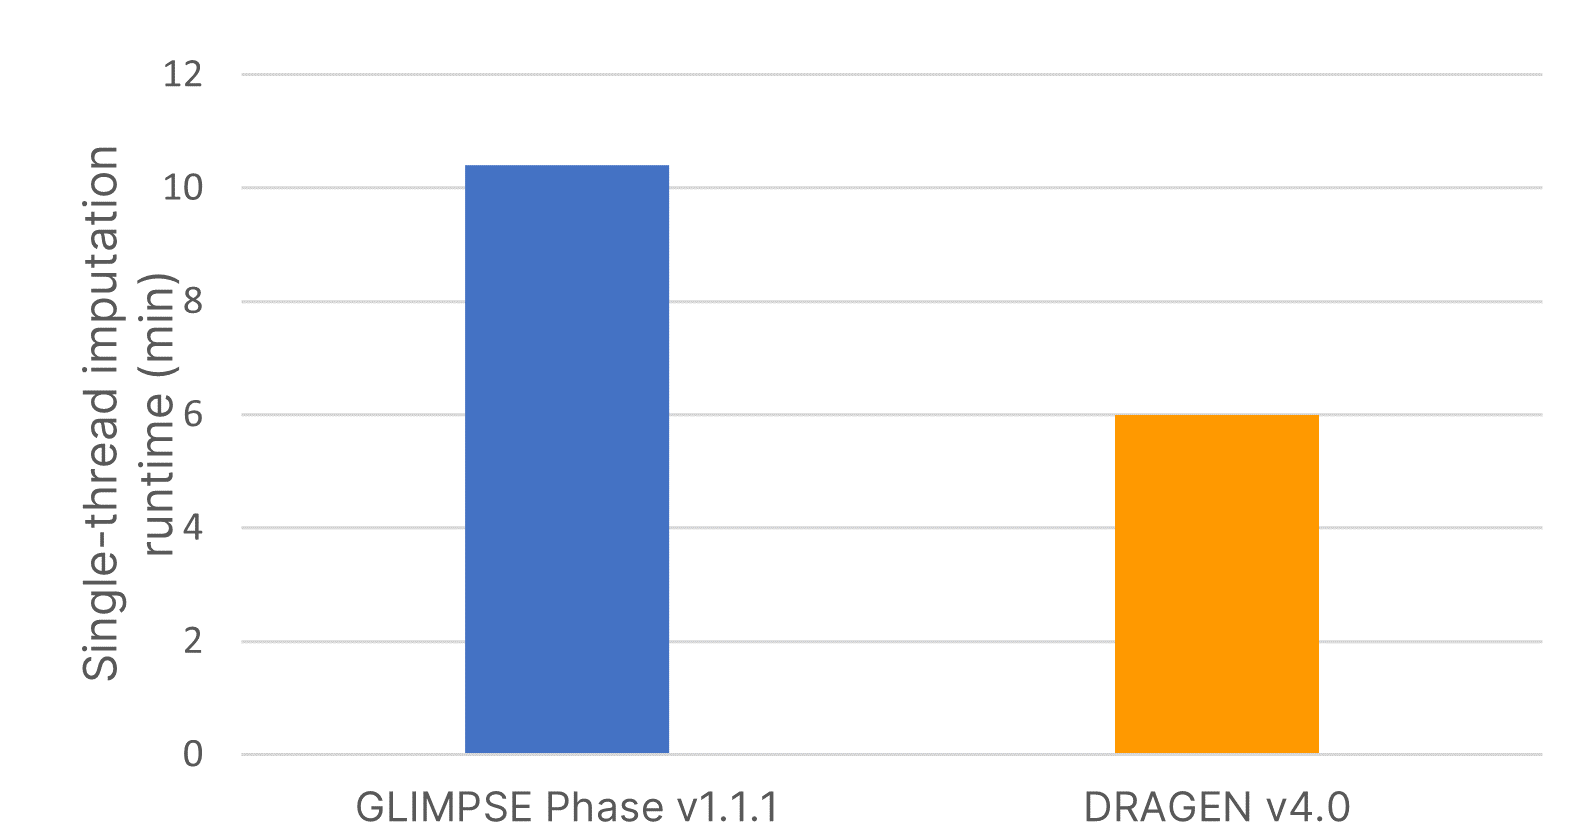 Figure 2. Comparison of phase run times with GLIMPSE 